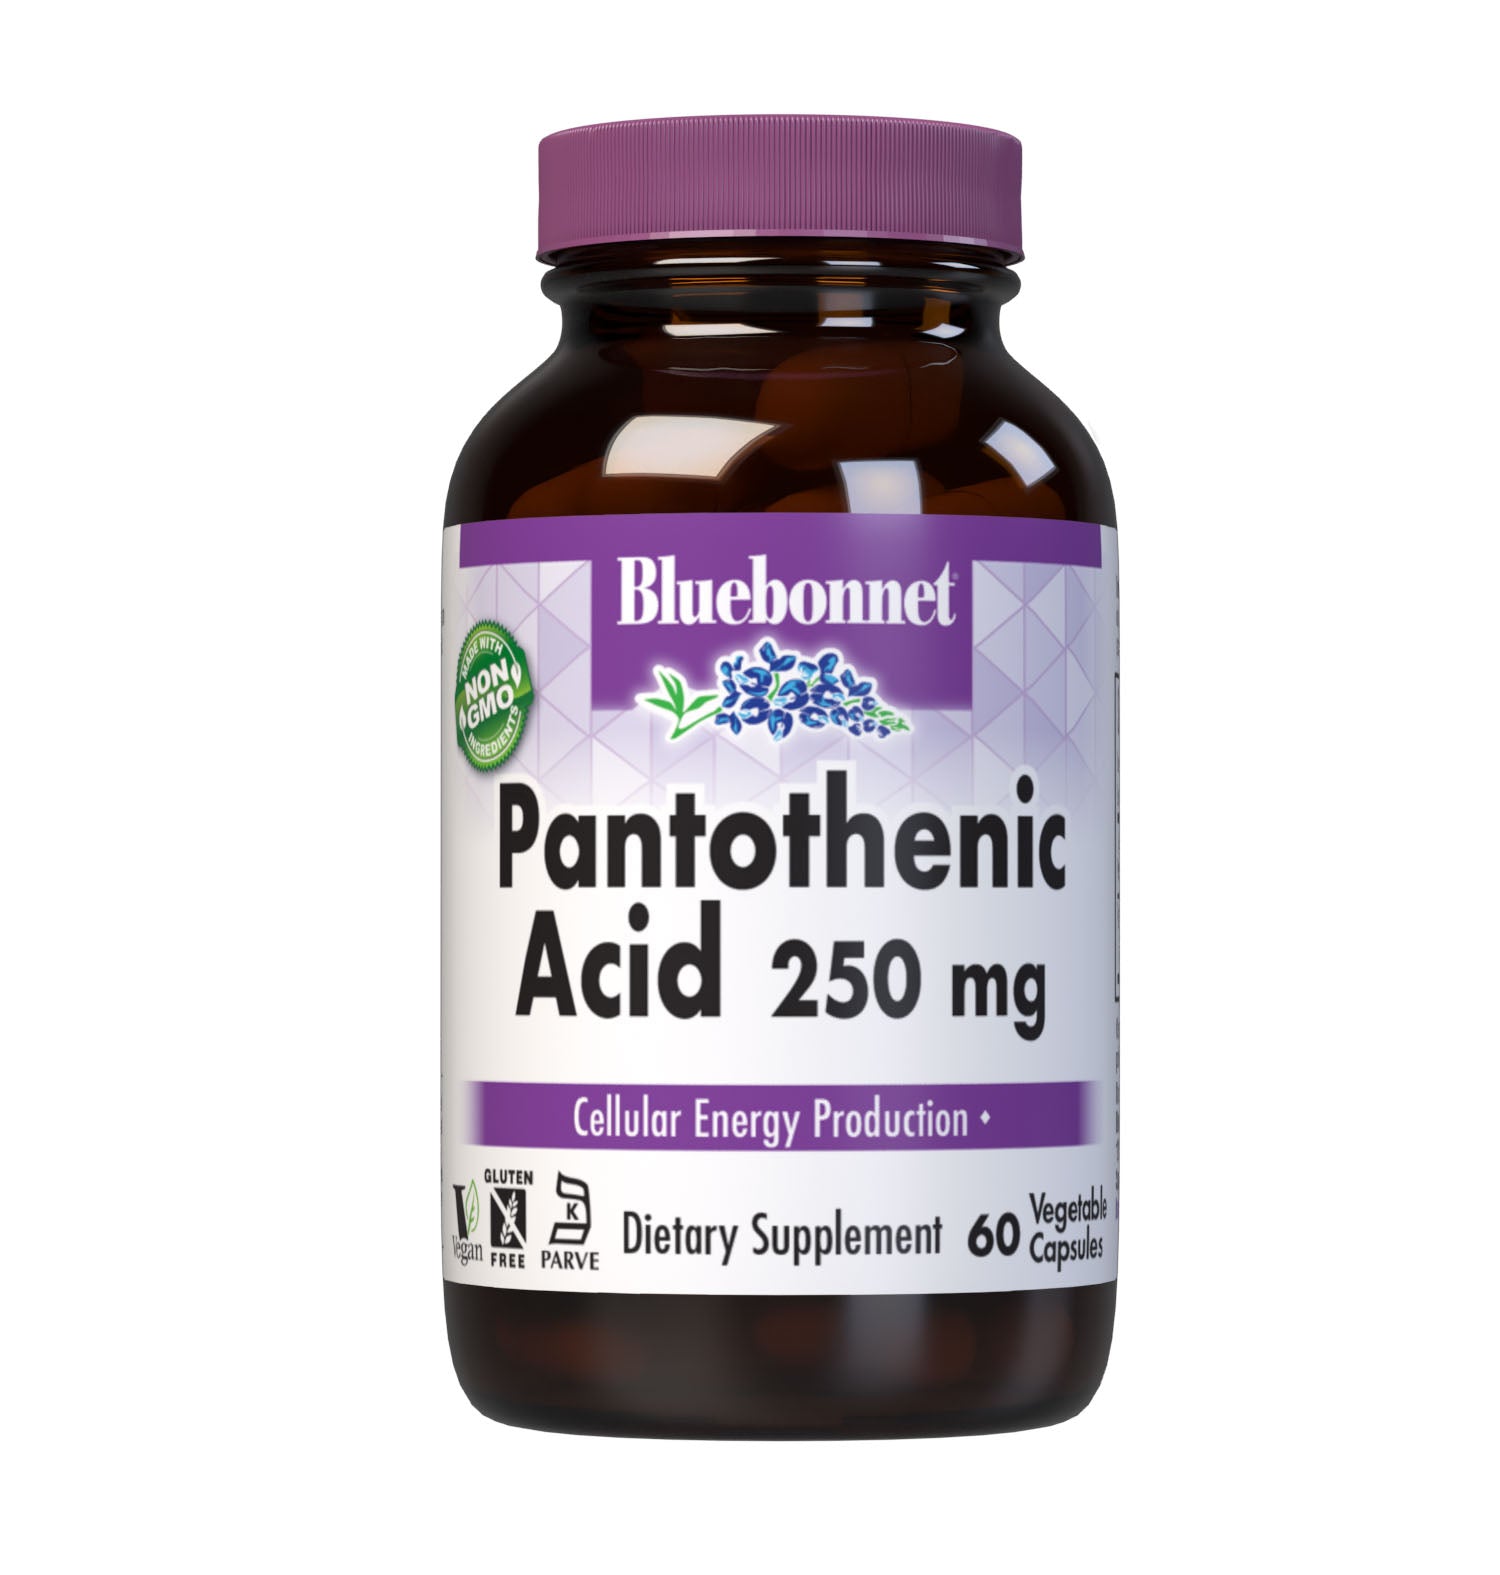 Bluebonnet’s Pantothenic Acid 250 mg 60 Vegetable Capsules provide pantothenic acid from calcium D-pantothenate. Tested for potency and purity in our own state-of-the-art laboratory. #size_60 count